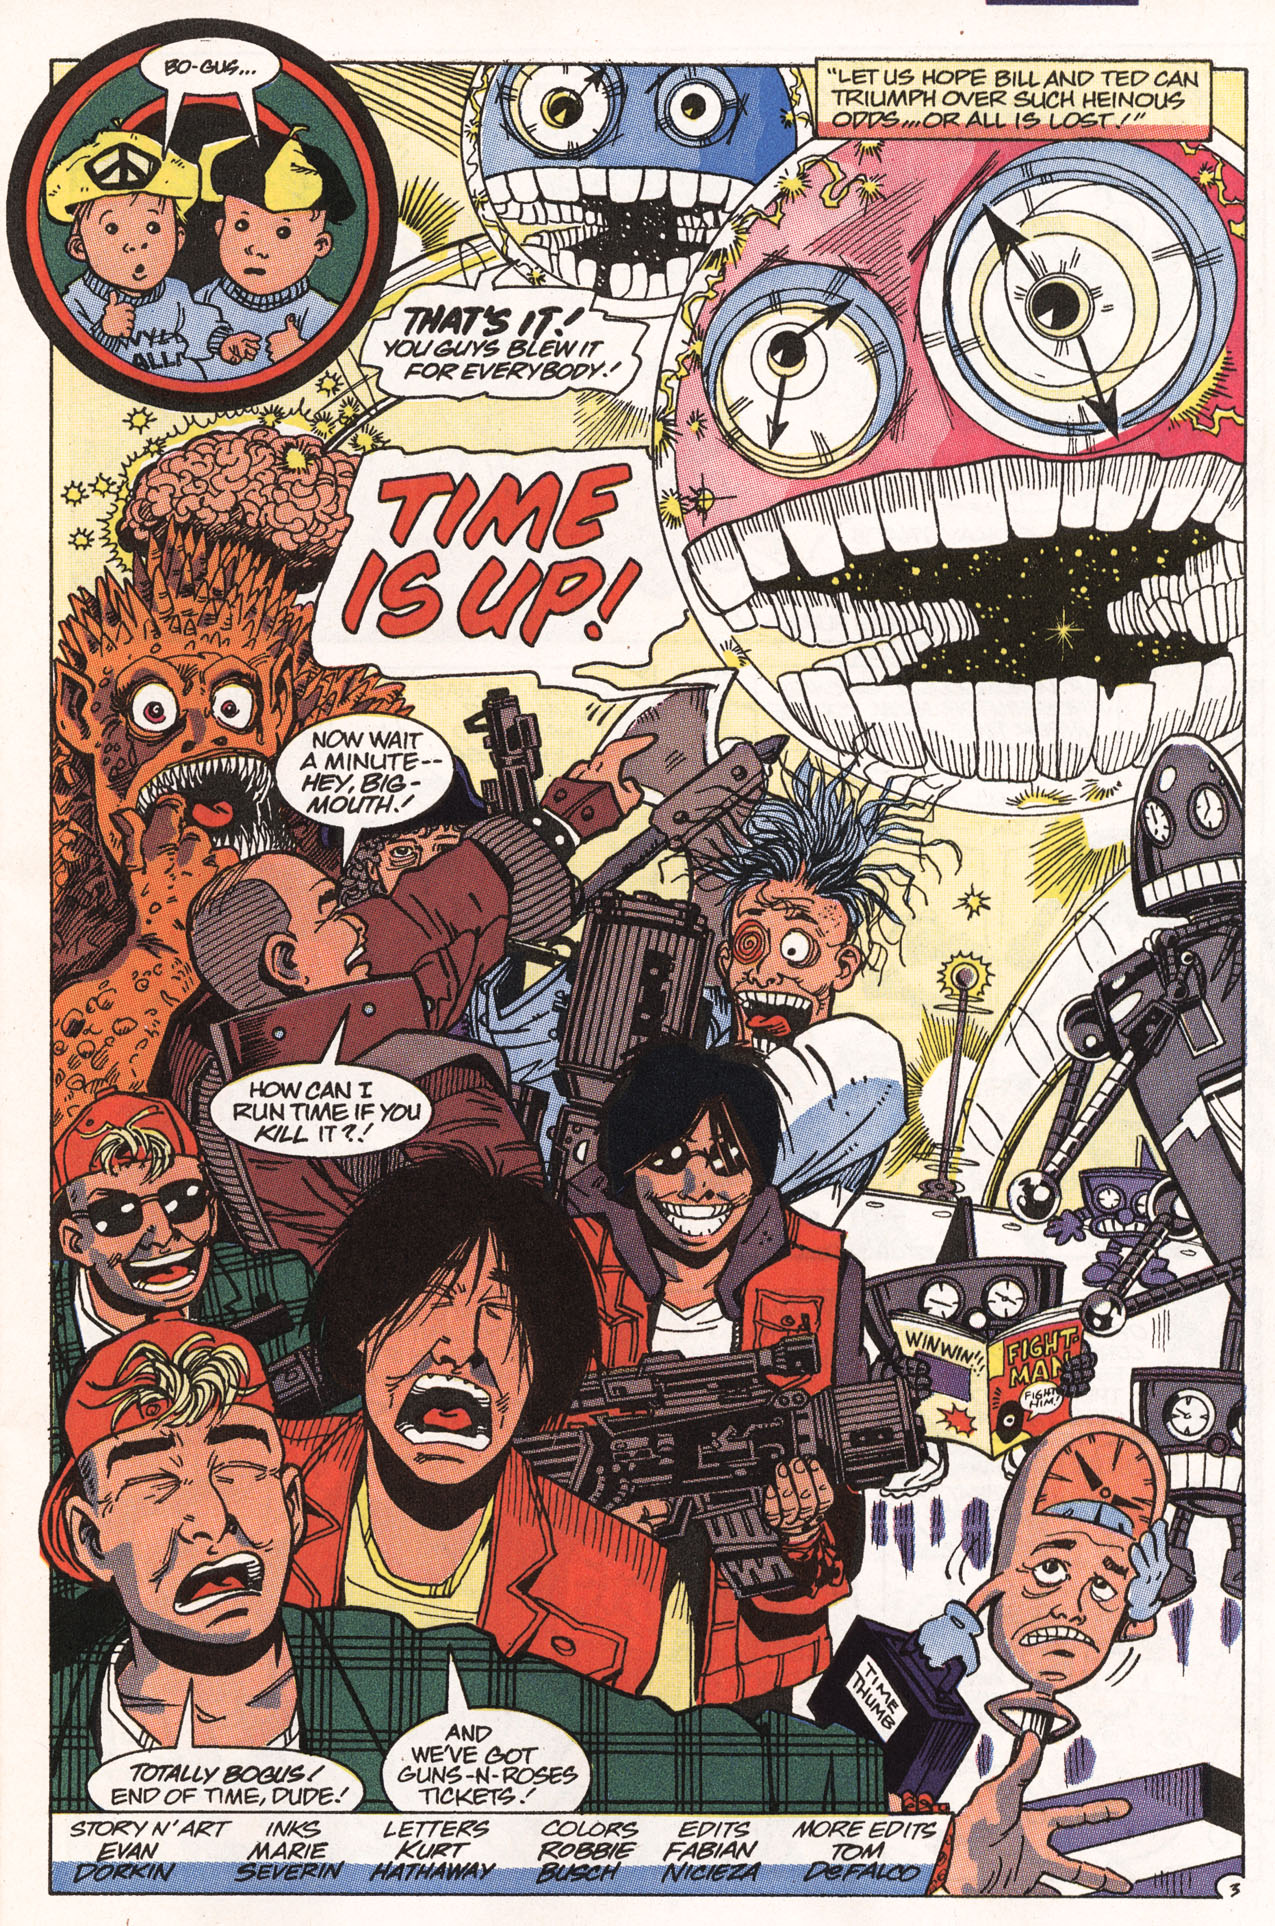 Read online Bill & Ted's Excellent Comic Book comic -  Issue #7 - 5